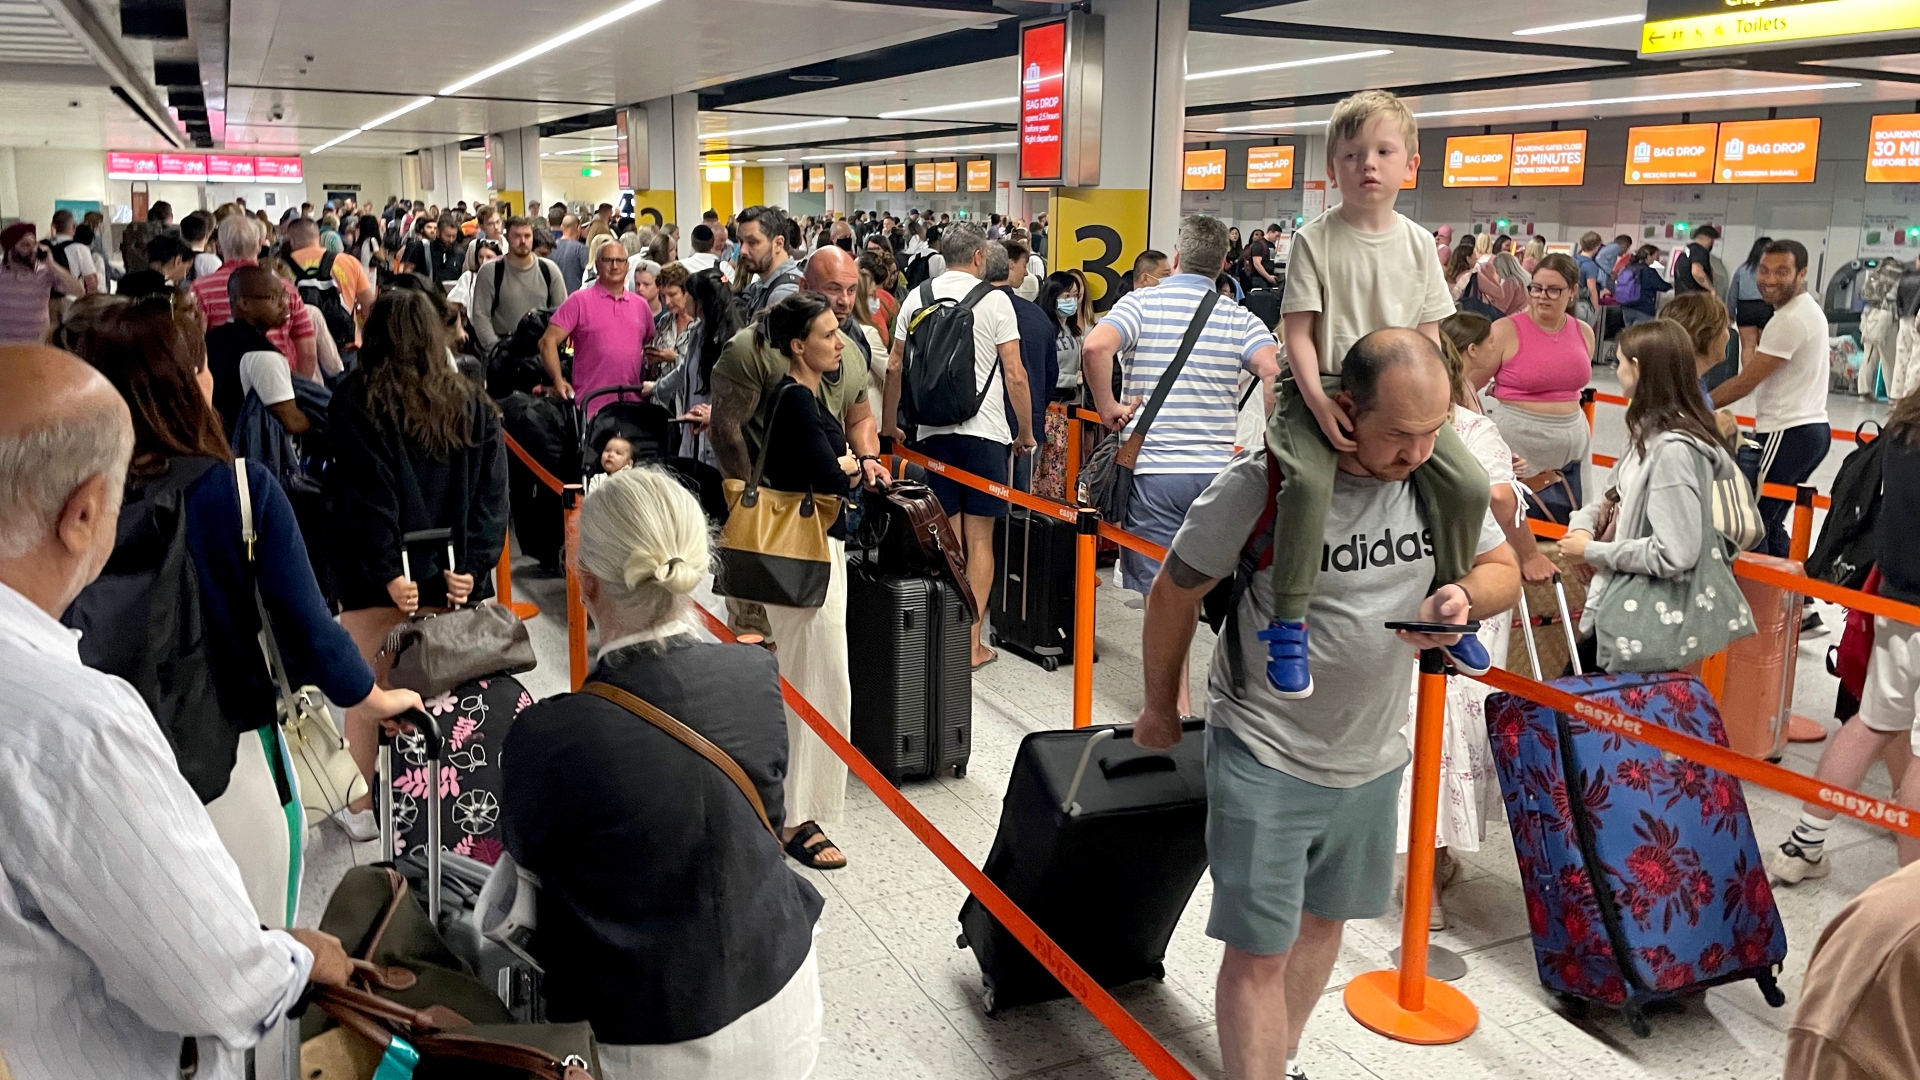 EasyJet strikes start TODAY – find out if your flight is affected